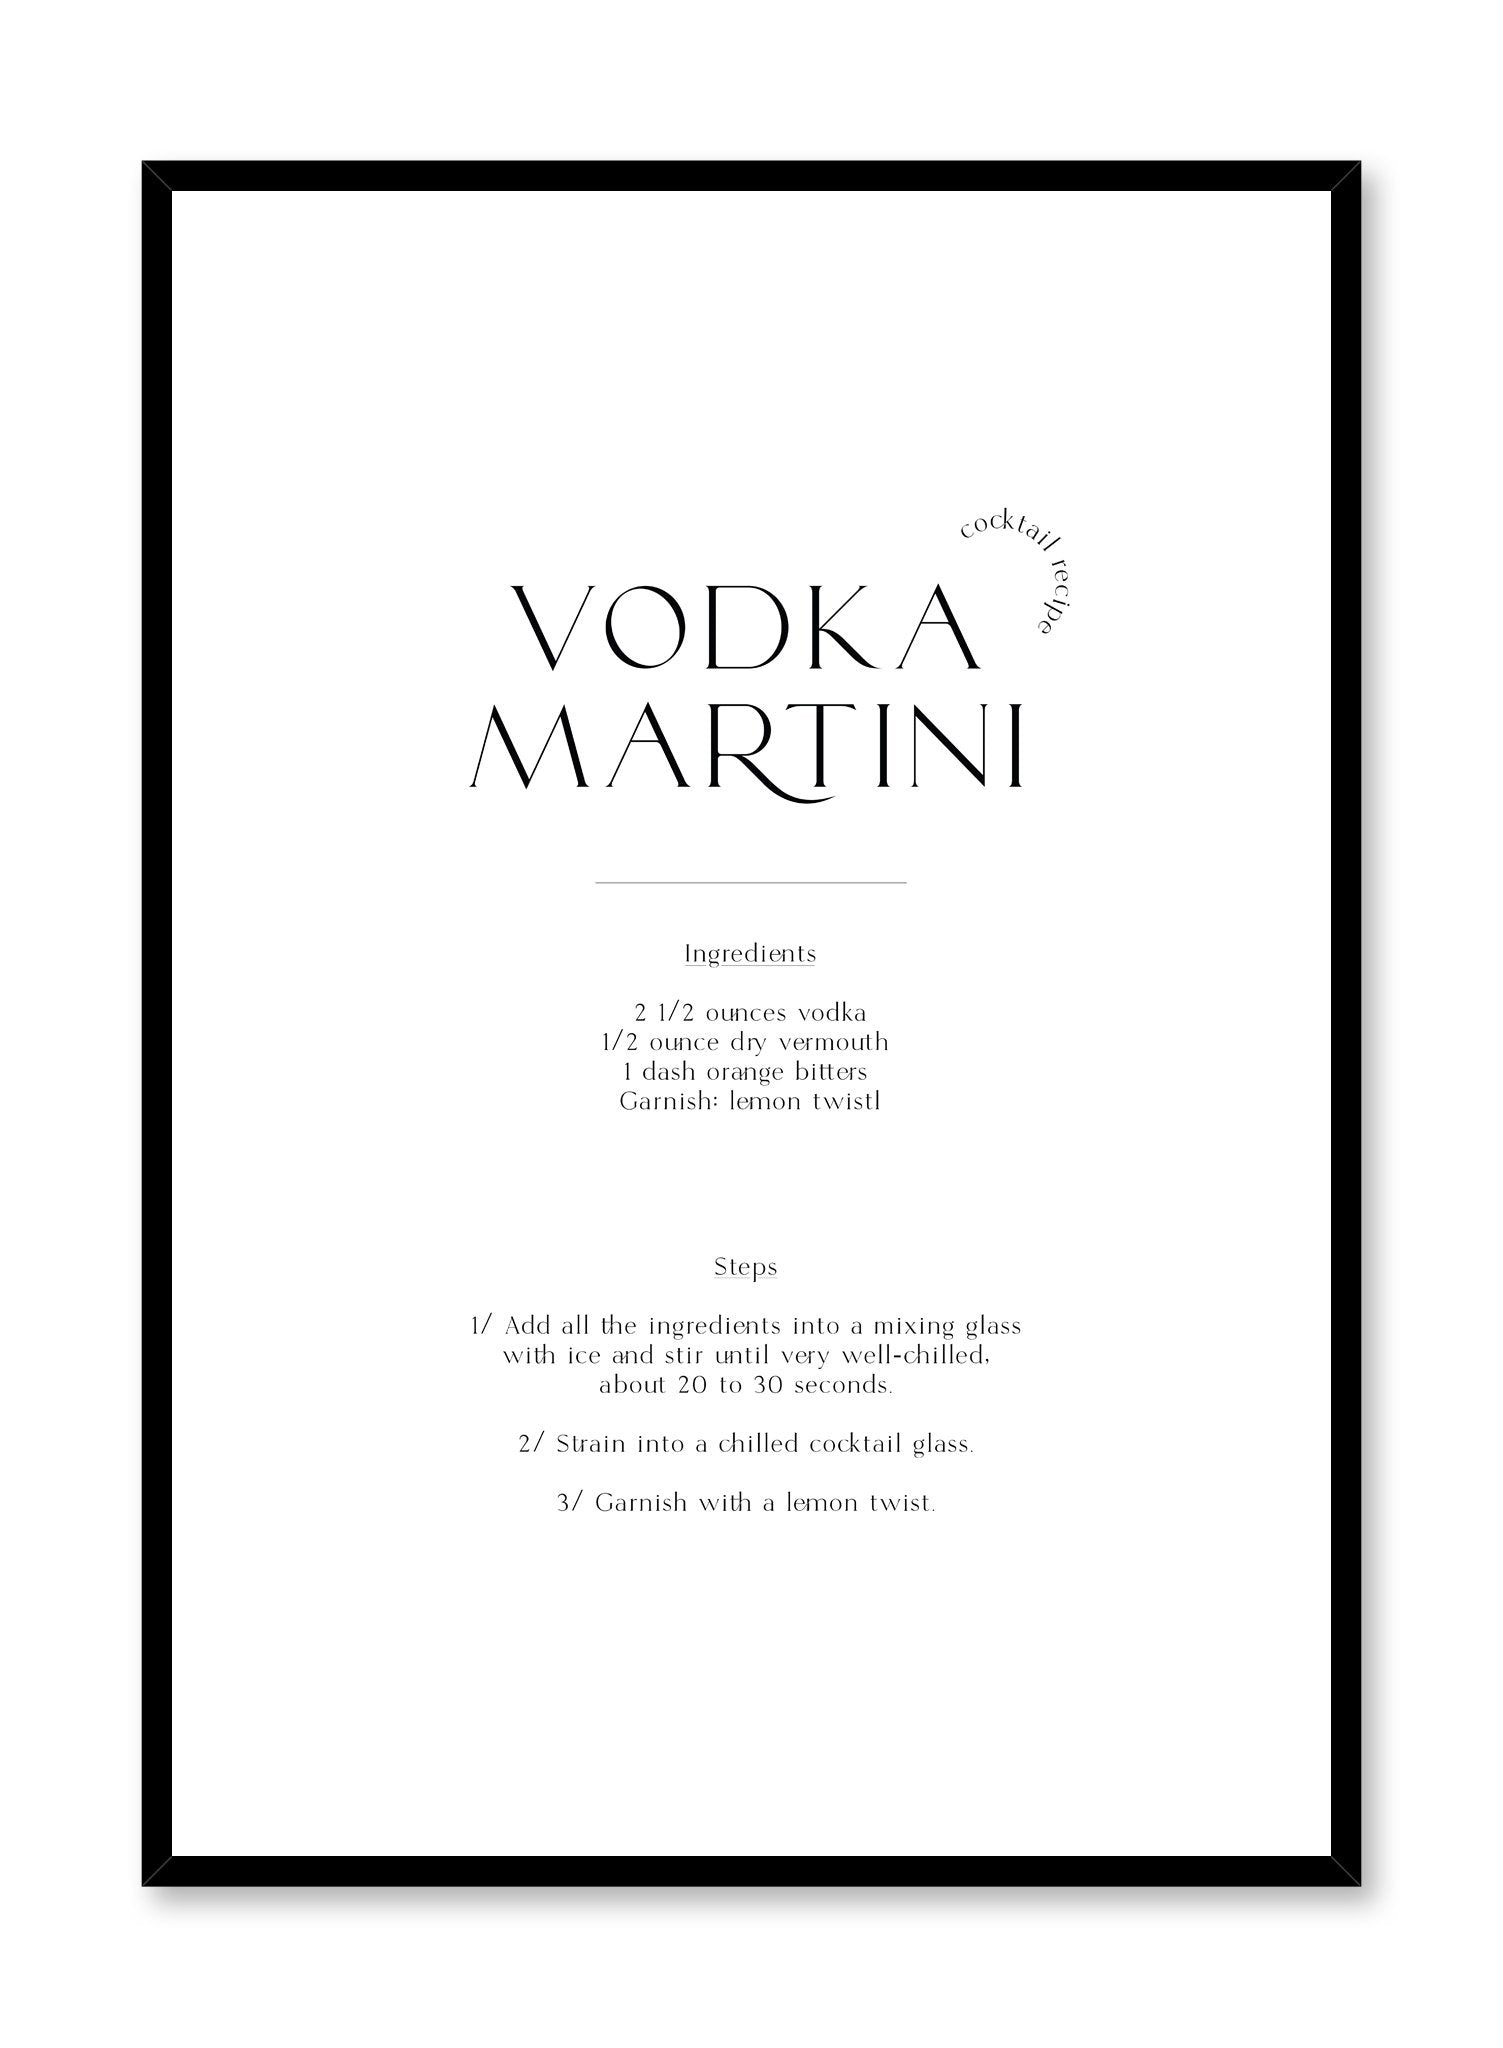 Vodka Martini is a cocktail recipe typography poster by Opposite Wall.